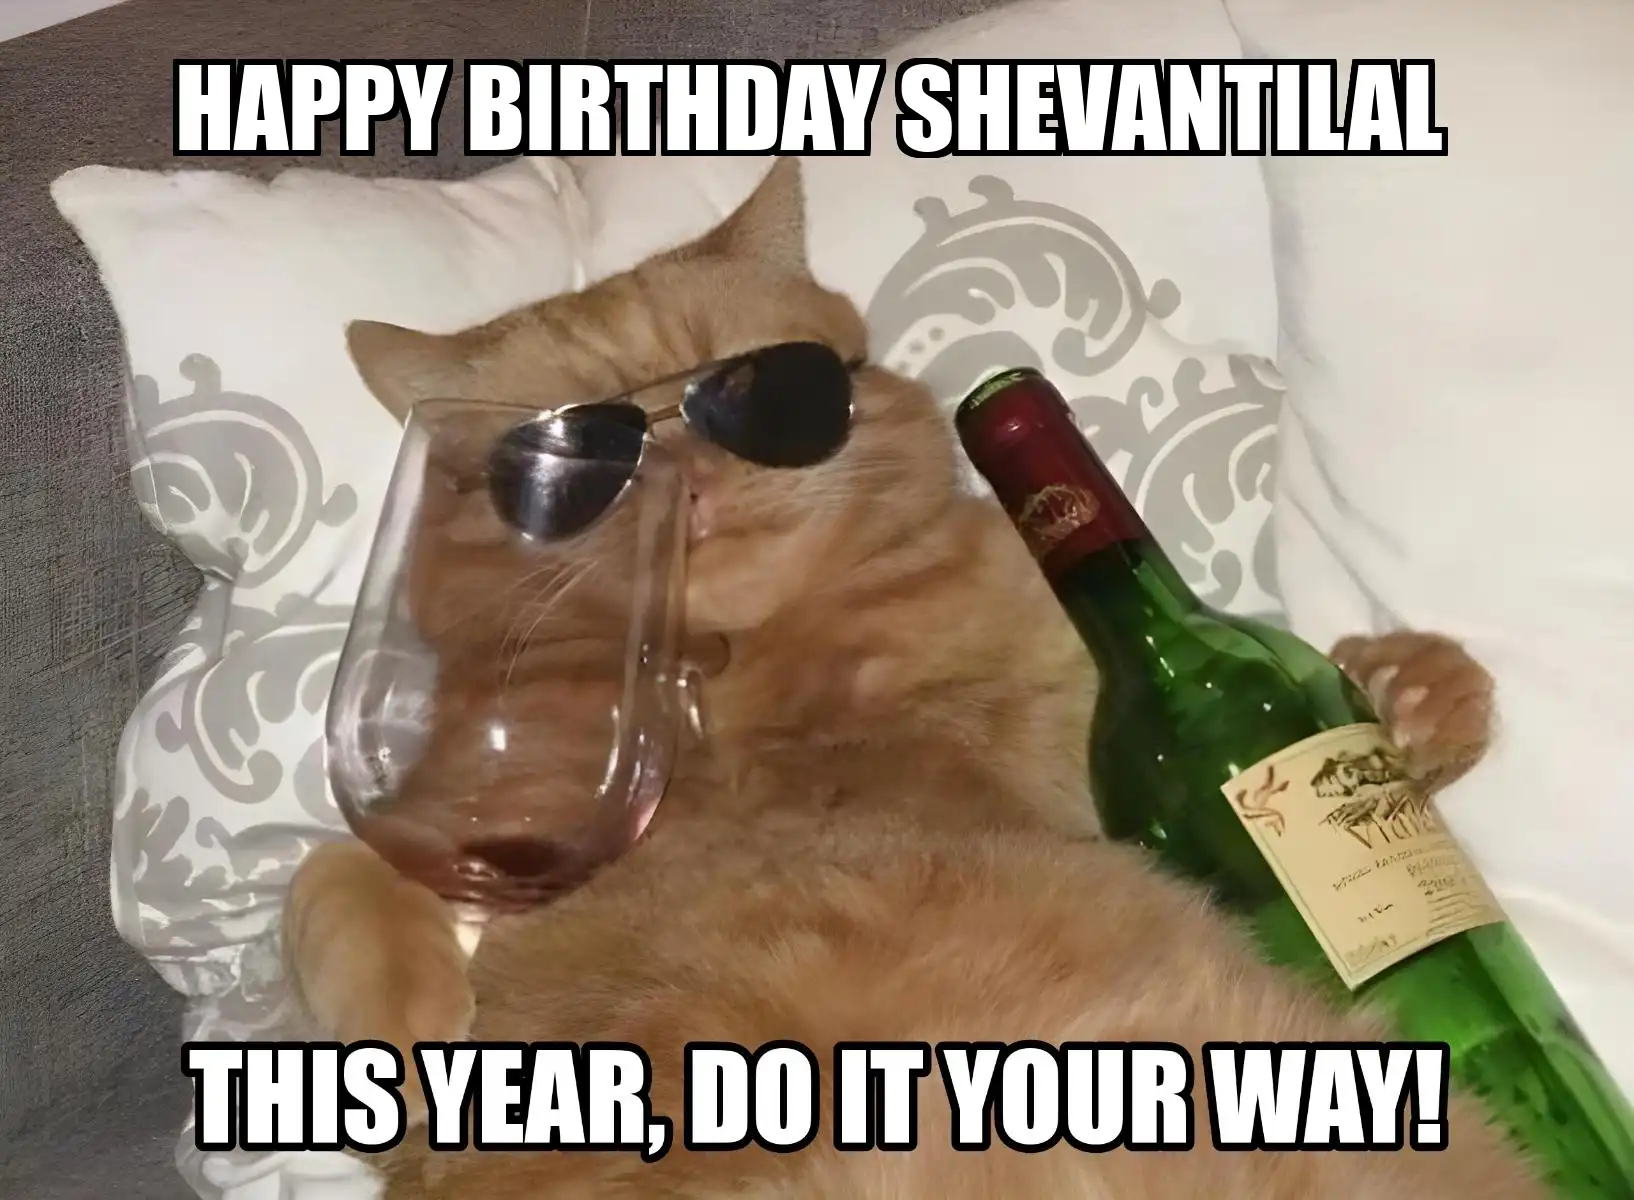 Happy Birthday Shevantilal This Year Do It Your Way Meme